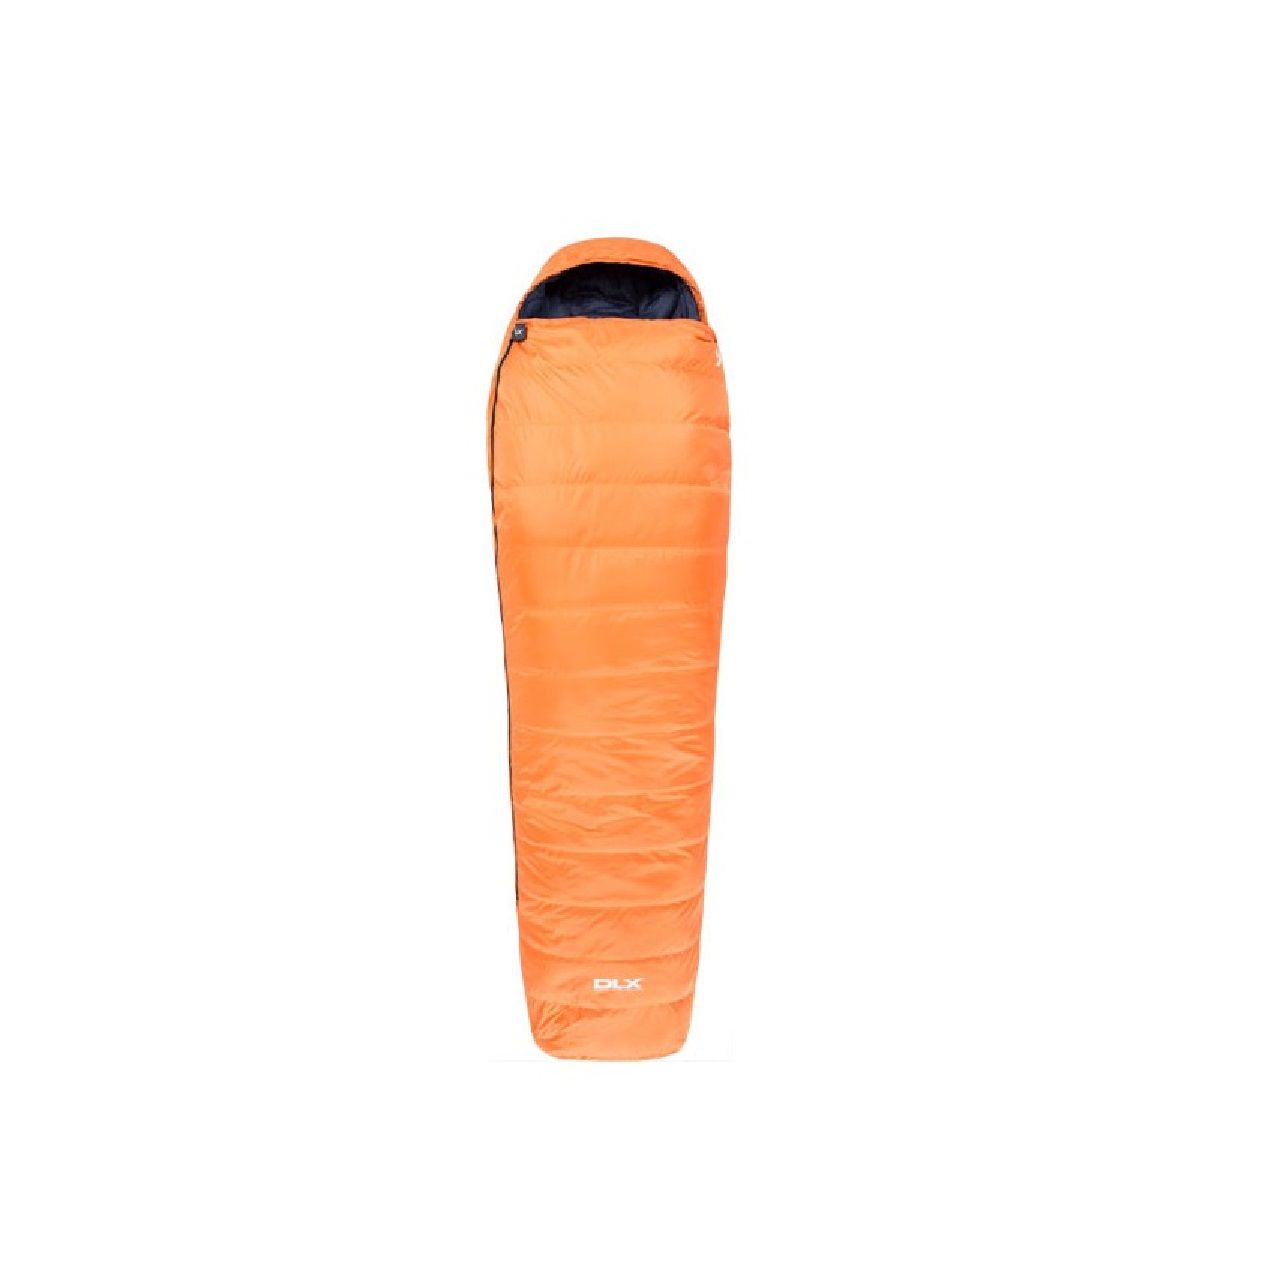 3 season down sleeping bag. Compression sack. Size: 220 x 80 x 55cm. Fill power 500. 2 way zipper. Comfort: +5C, Lower limit: +0C, Extreme: -8C. Shell: 100% Polyamide, Lining: 100% Polyester, Filling: 70% Duck down/30% Feather.